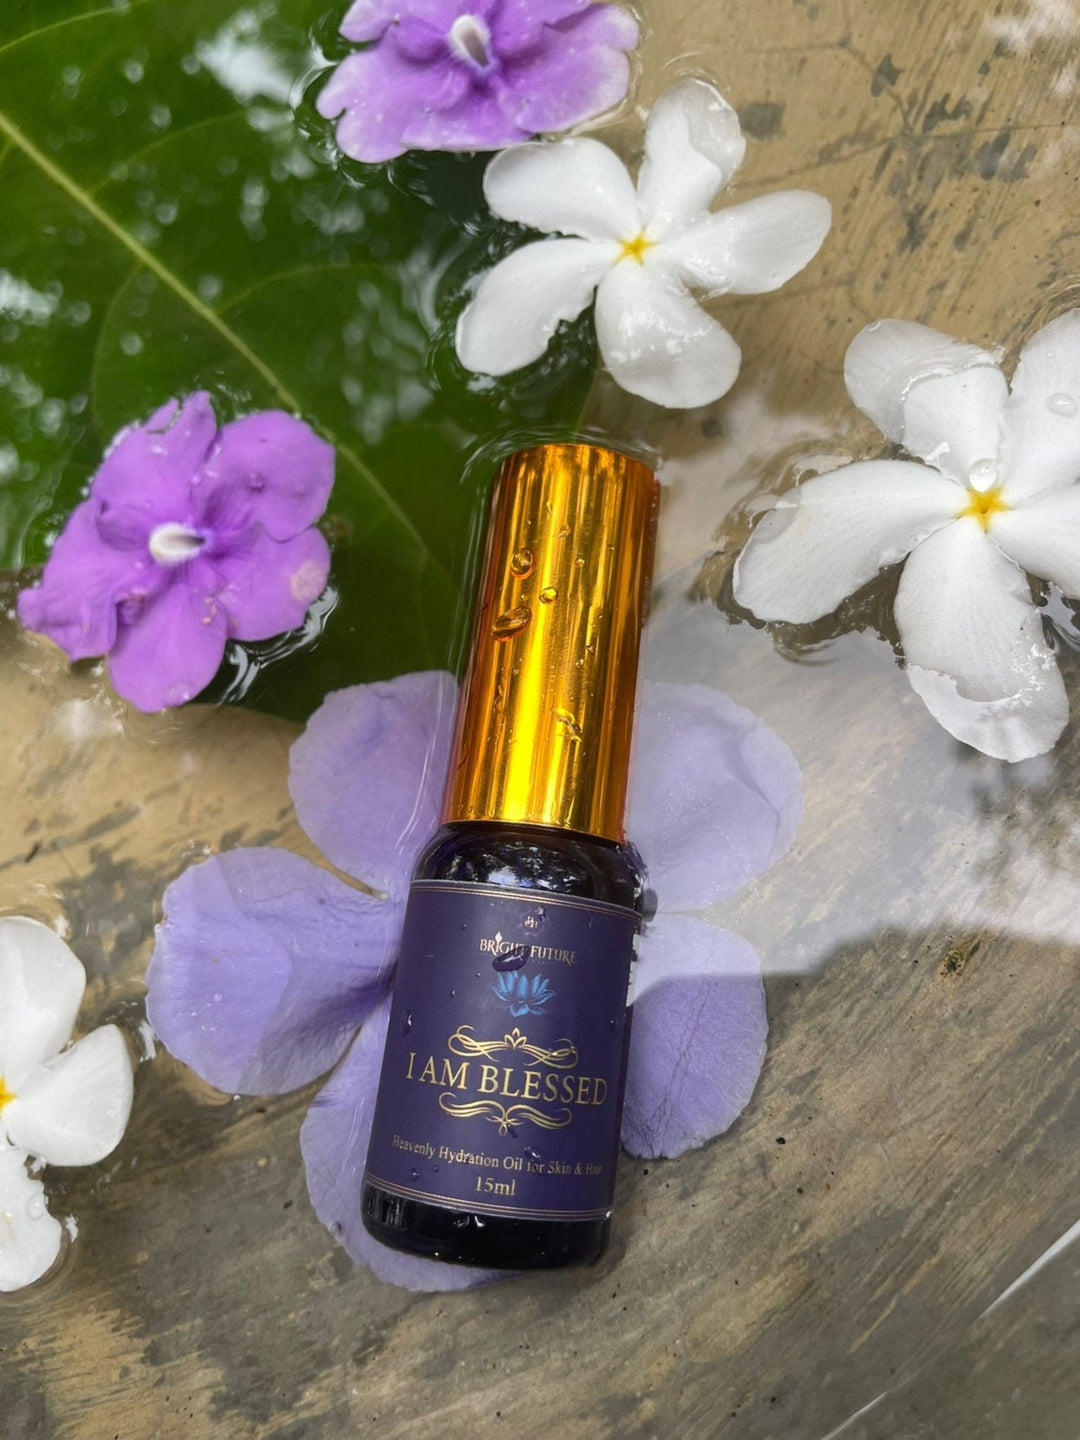 I AM BLESSED: Heavenly Hydration Oil For Skin and Hair - BrightFuture.Org Shop, Blue Lotus Oil | Hydration Oil For Skin and Hair | Bright Future